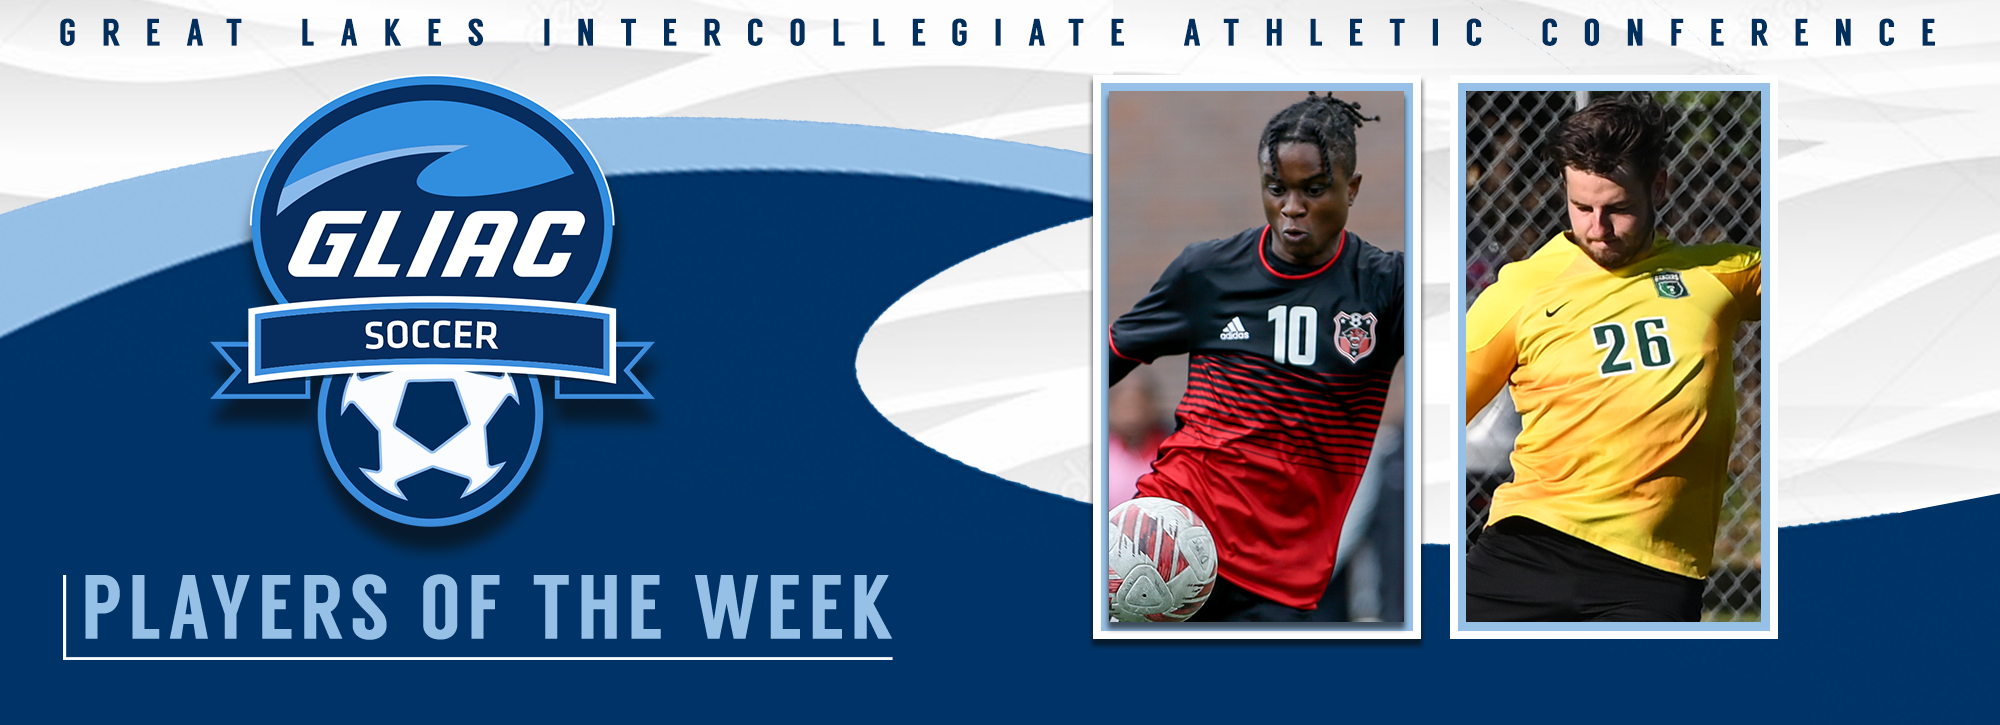 DU's Takawira Jr. and Parkside's Conolly receive GLIAC men's soccer players of the week awards